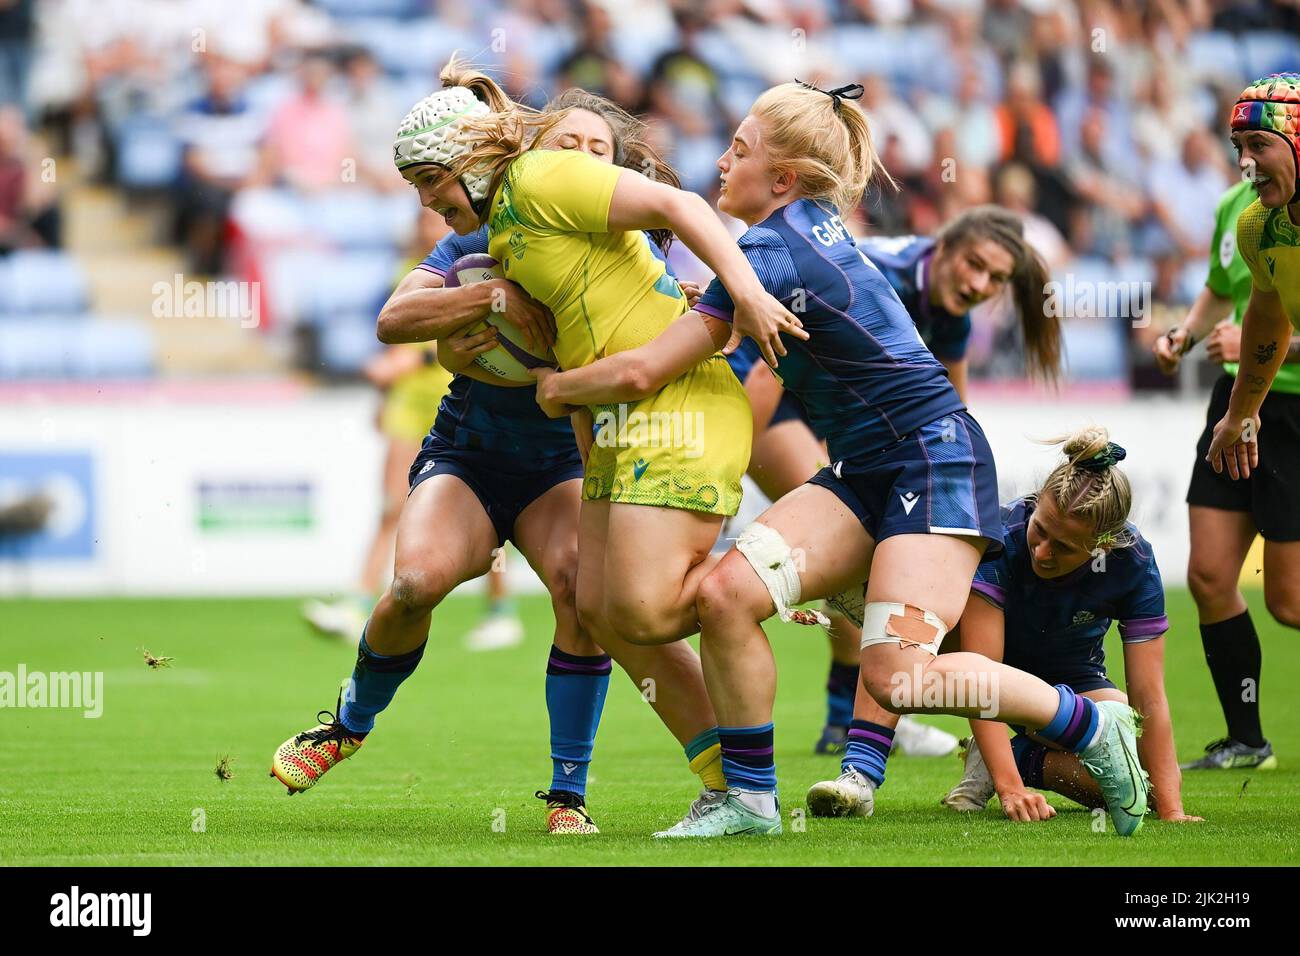 Faith Nathan of Australia scores a try during the Rugby Sevens at the Commonwealth Games at